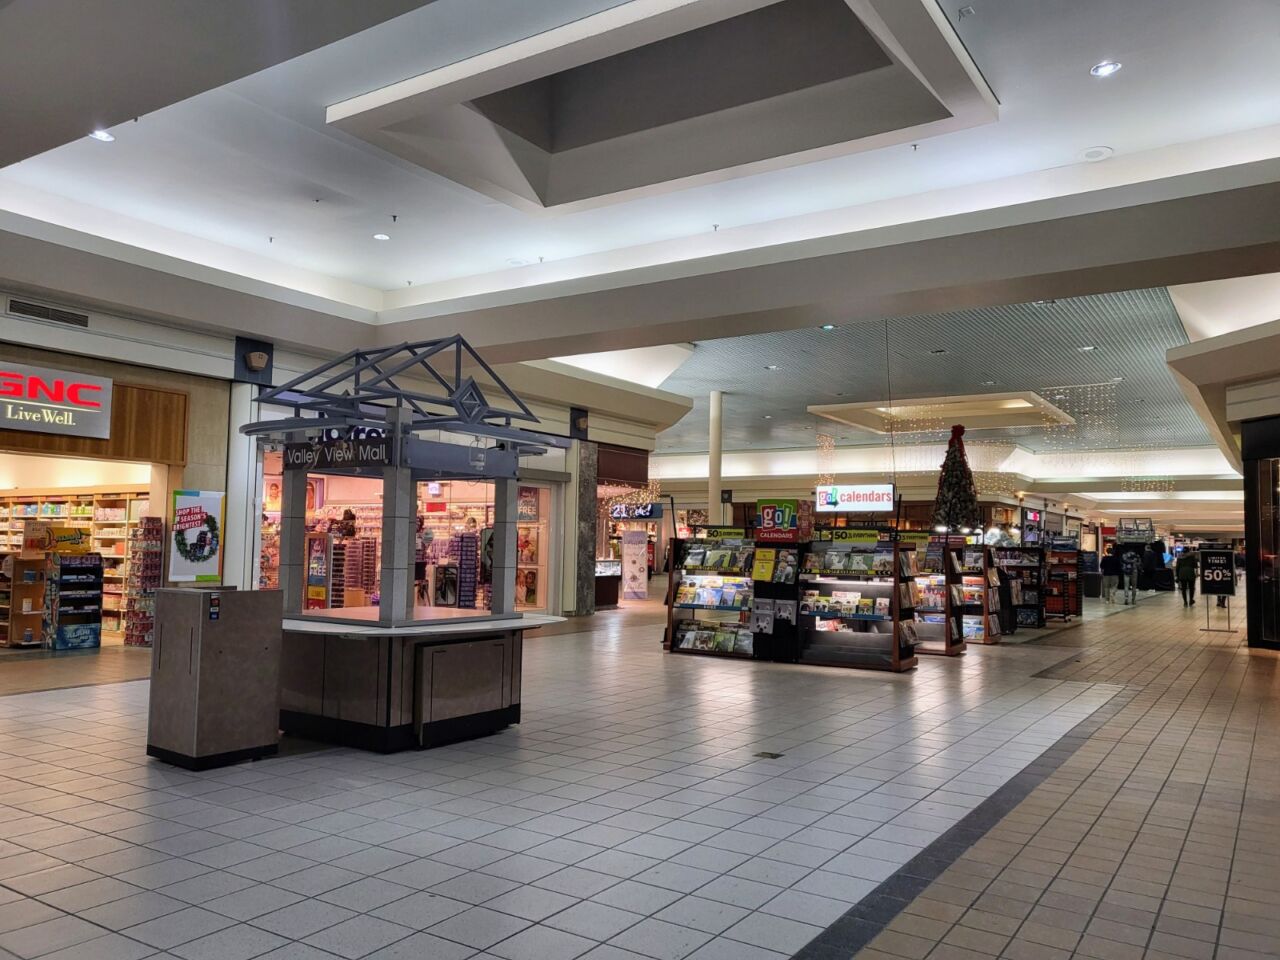 Does La Crosse's Valley View Mall need reimagining? WIZM 92.3FM 1410AM